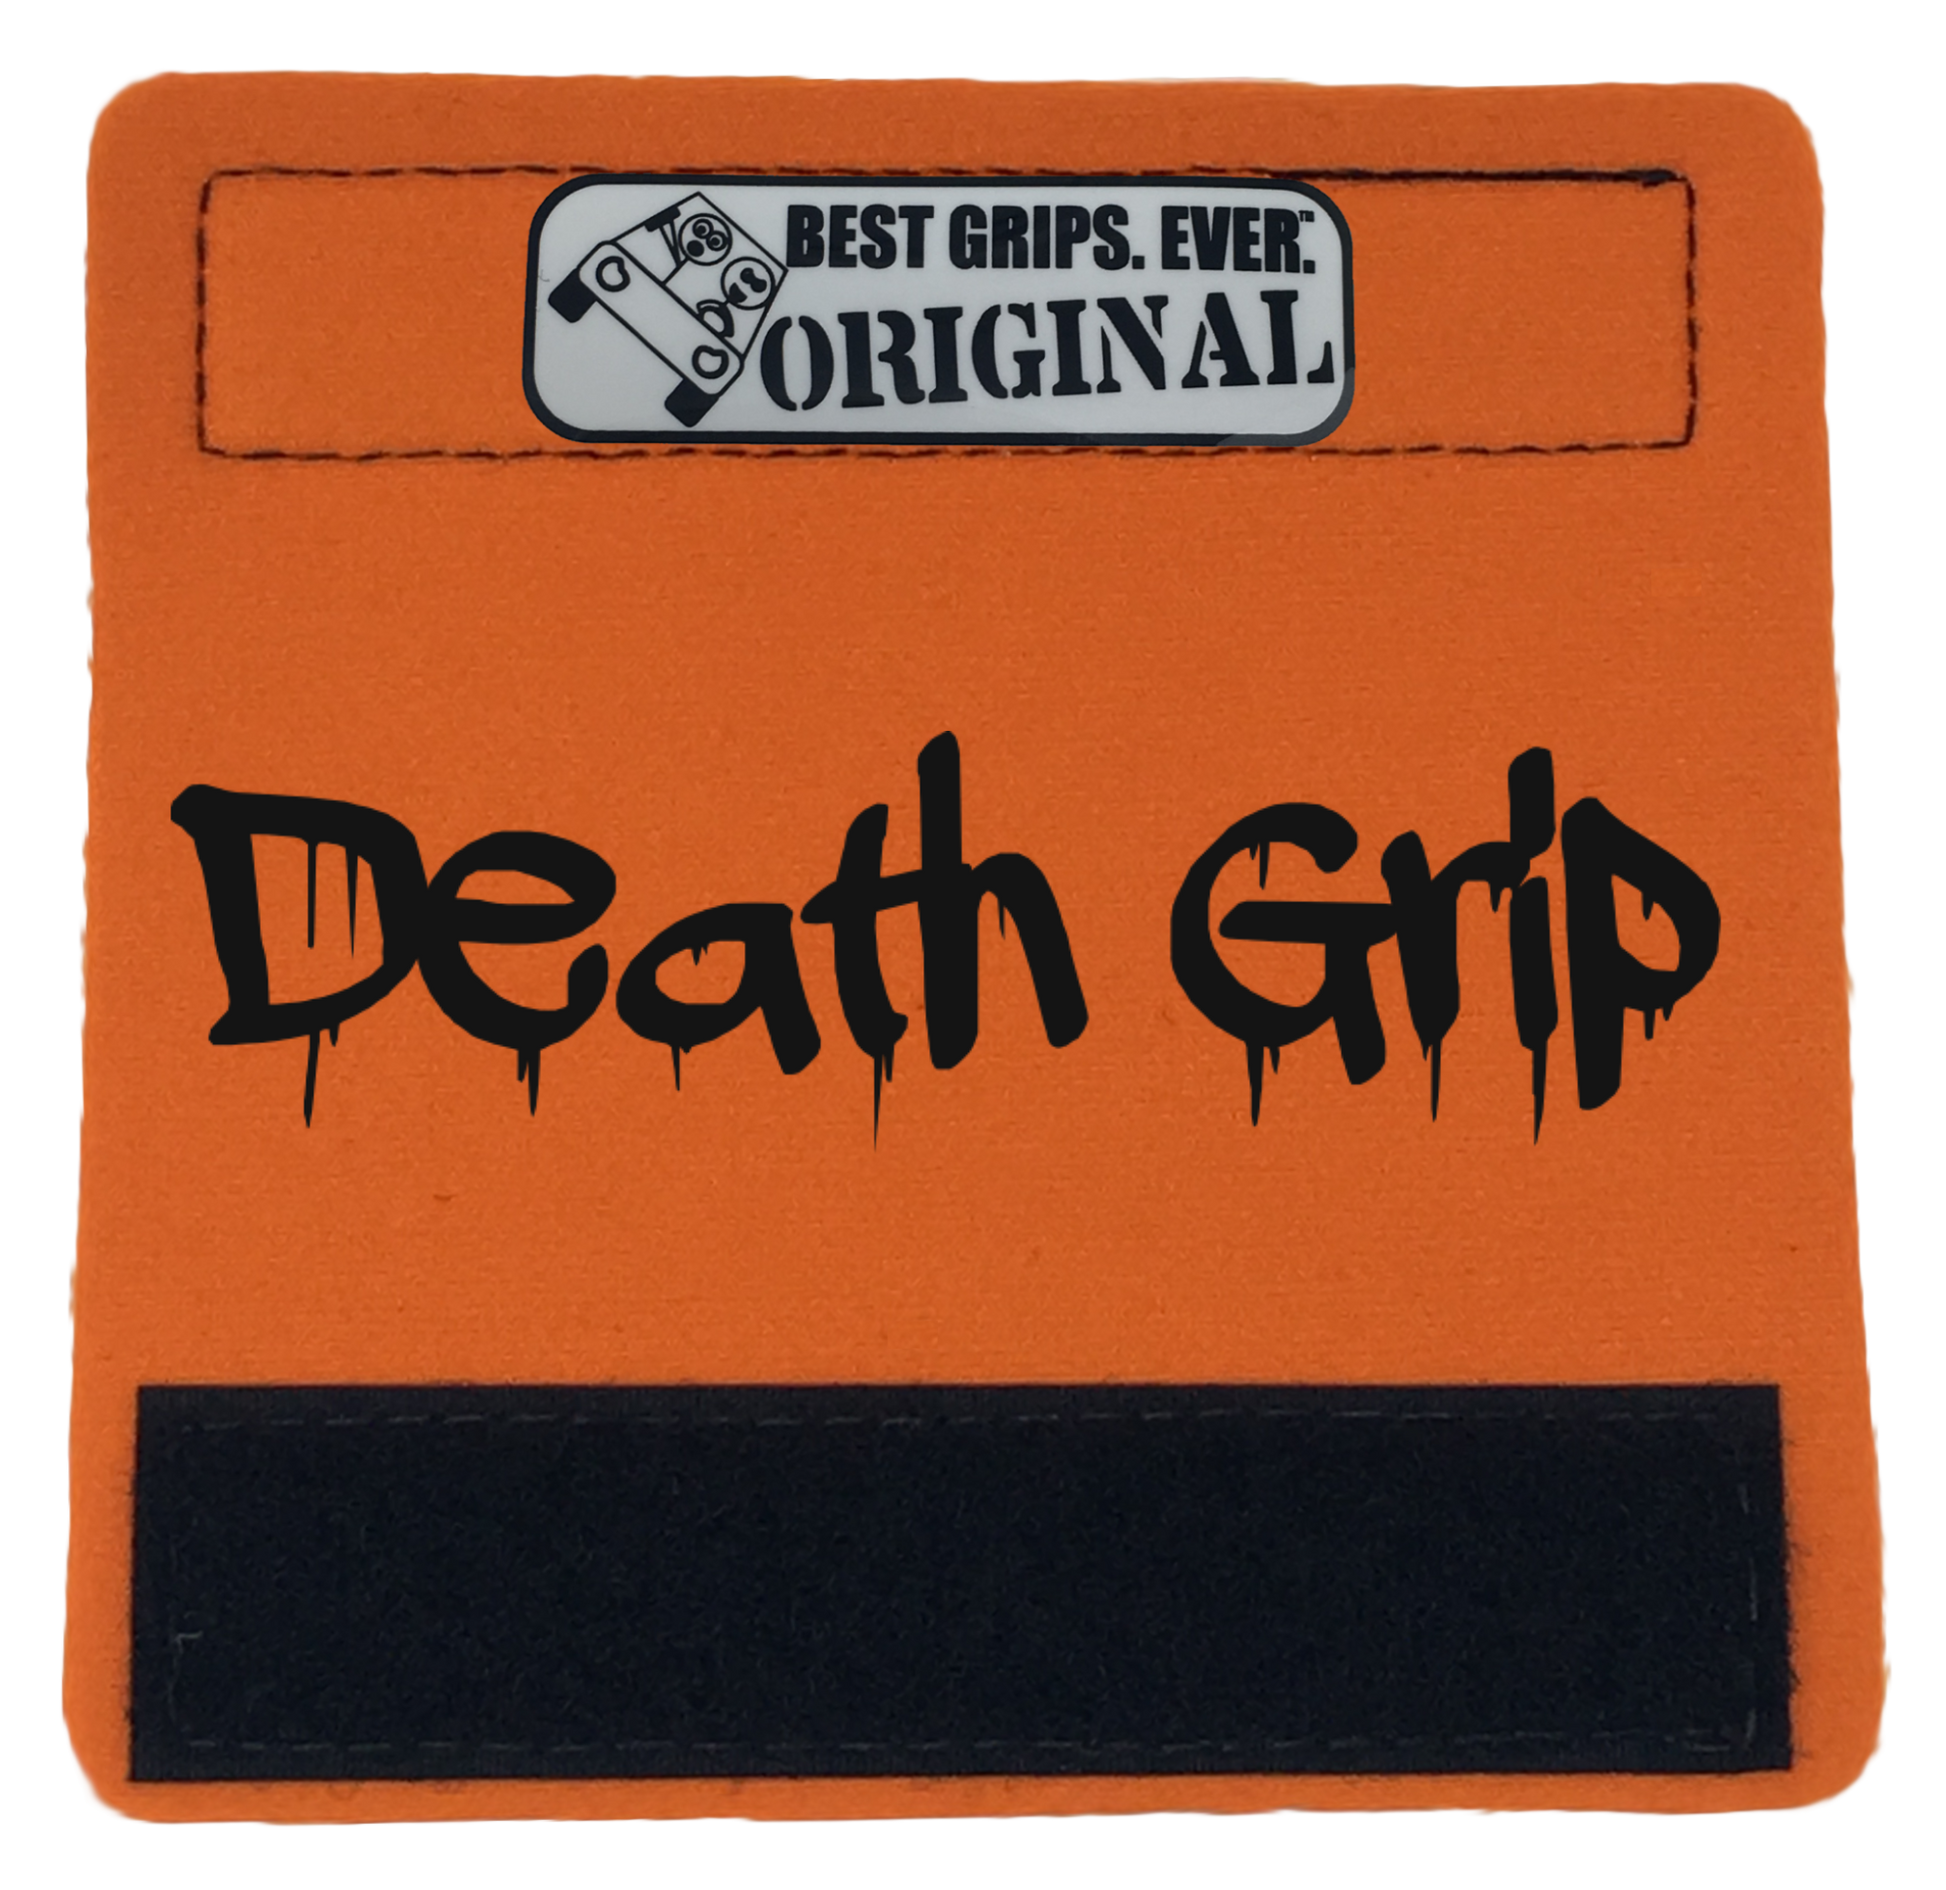 The Death Grip. - BEST GRIPS. EVER.®